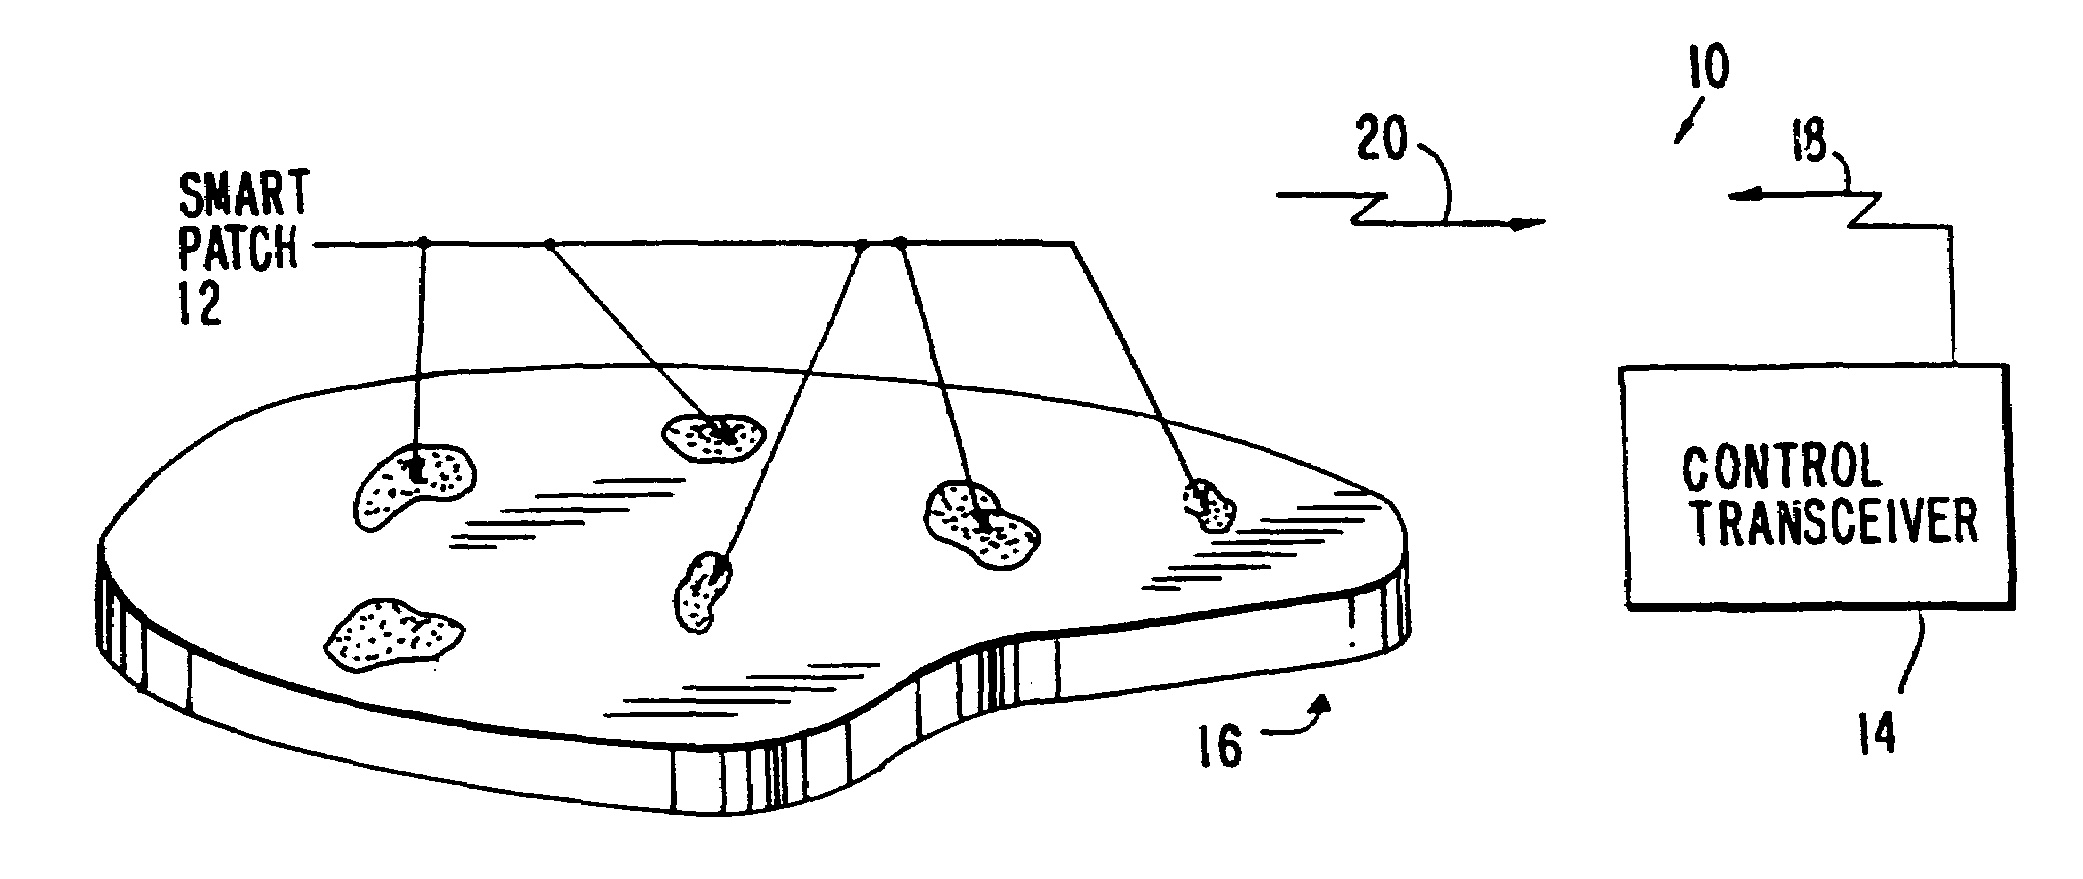 Integrated micro-strip antenna apparatus and a system utilizing the same for wireless communications for sensing and actuation purposes